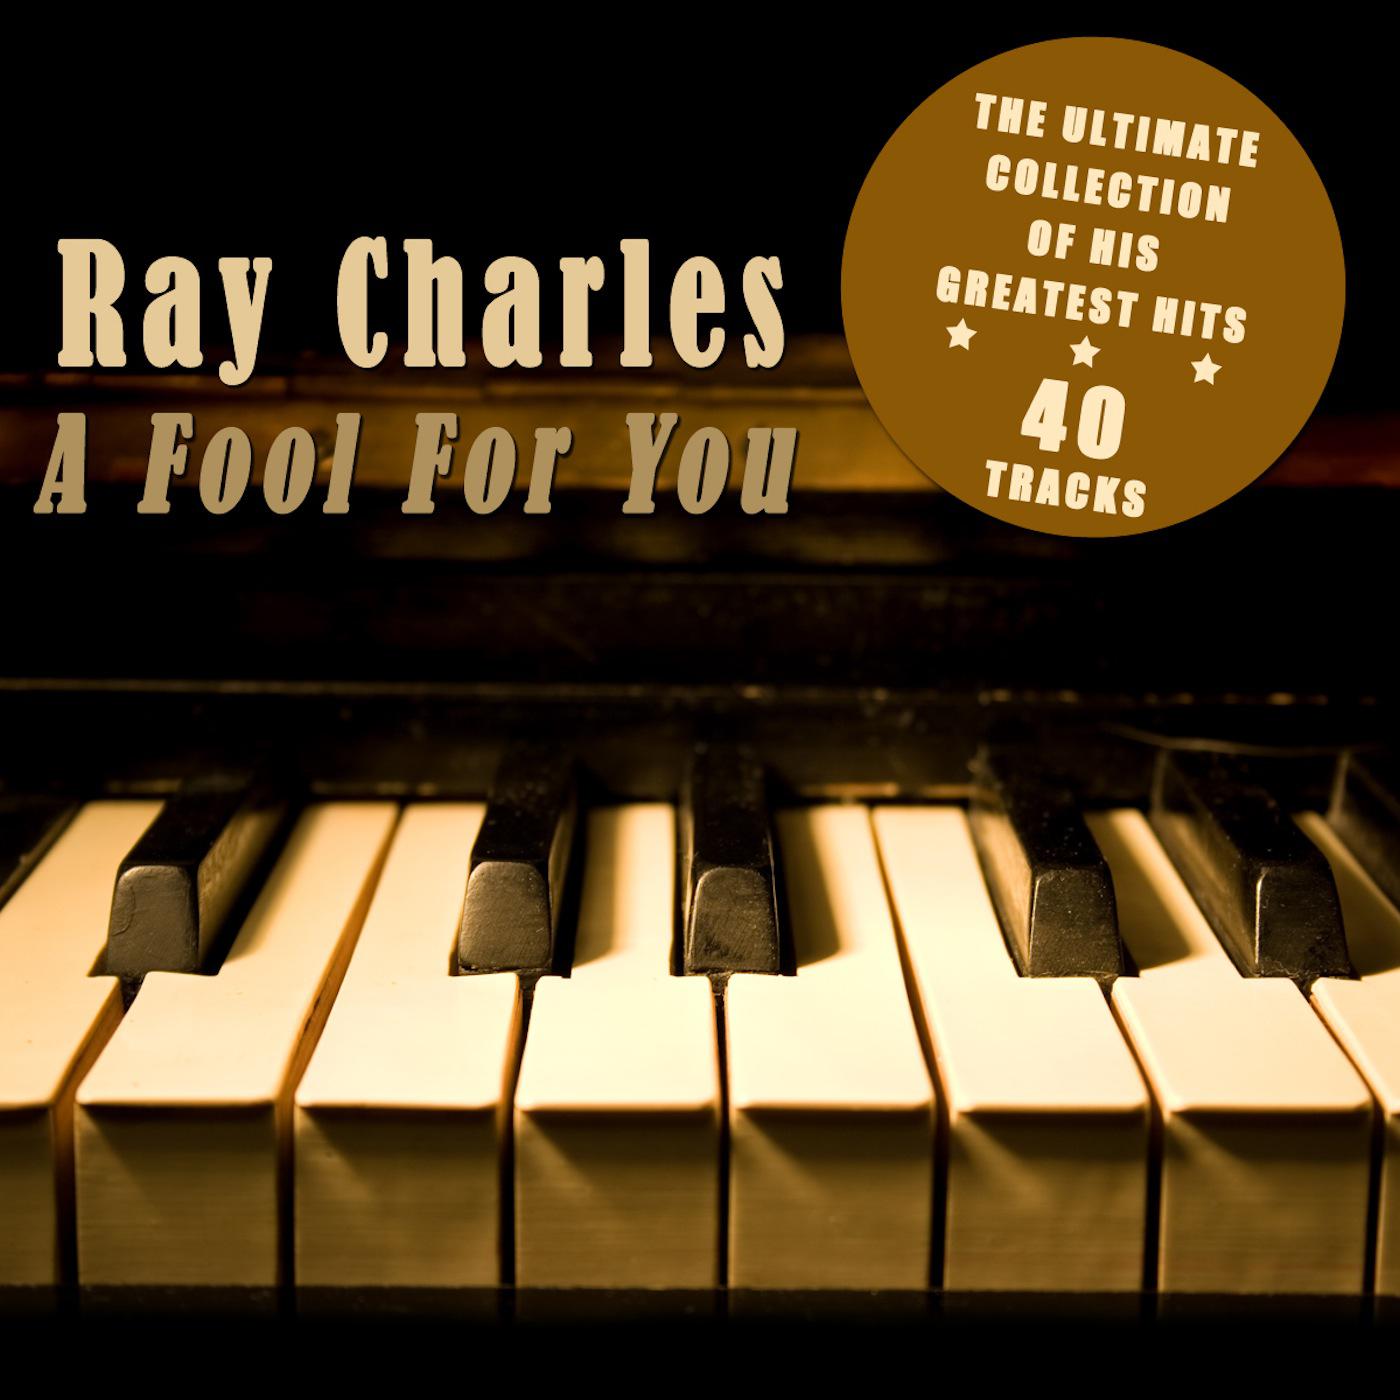 A Fool for You - The Ultimate Collection of His Greatest Hits